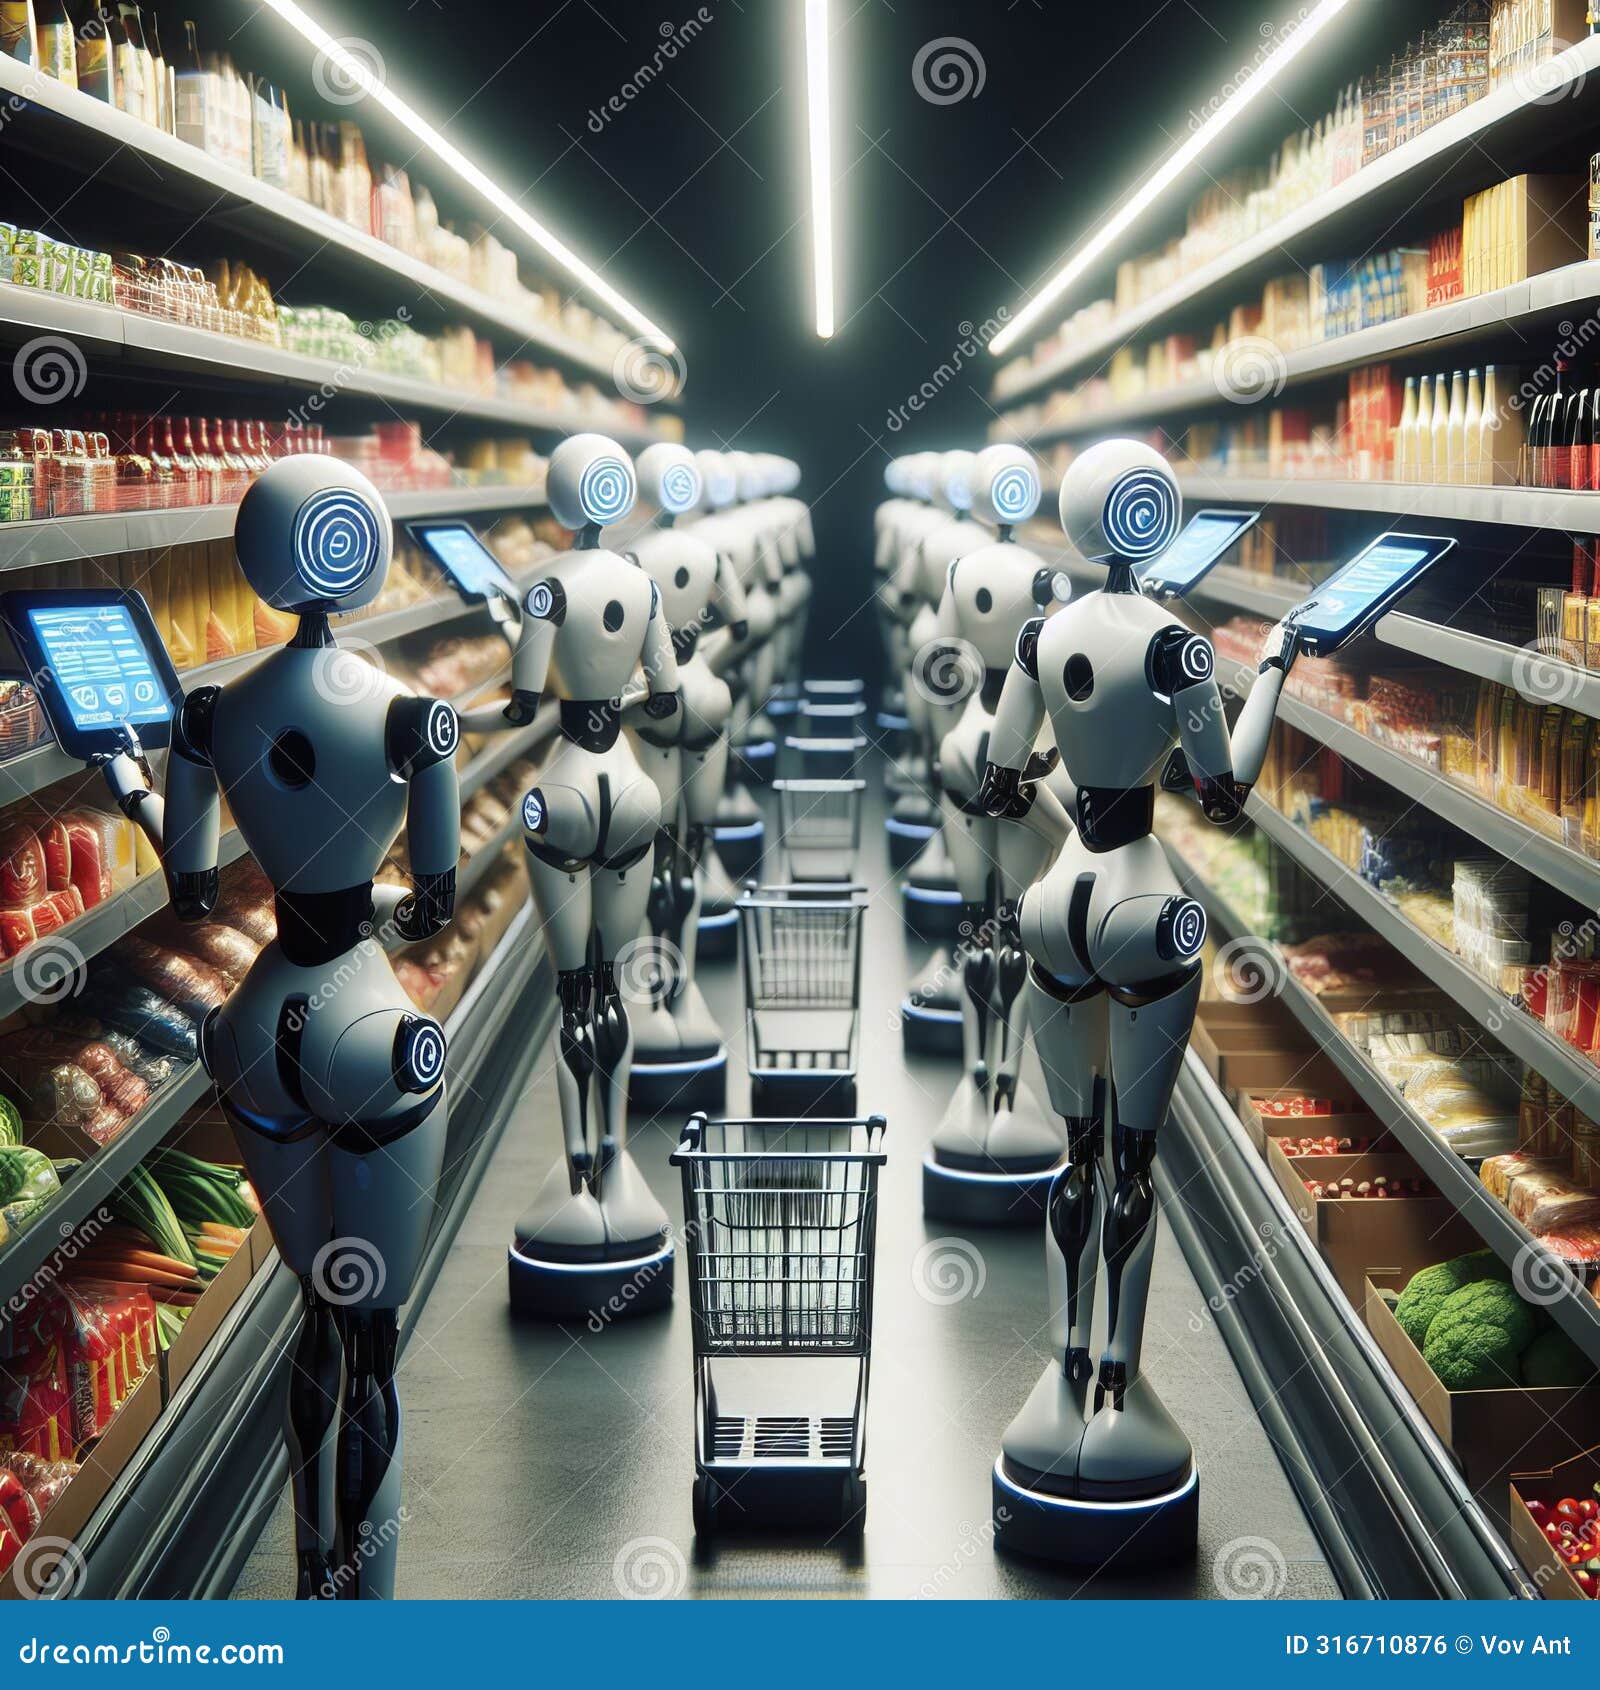 a group of robots scanning the aisles for food items, photorea